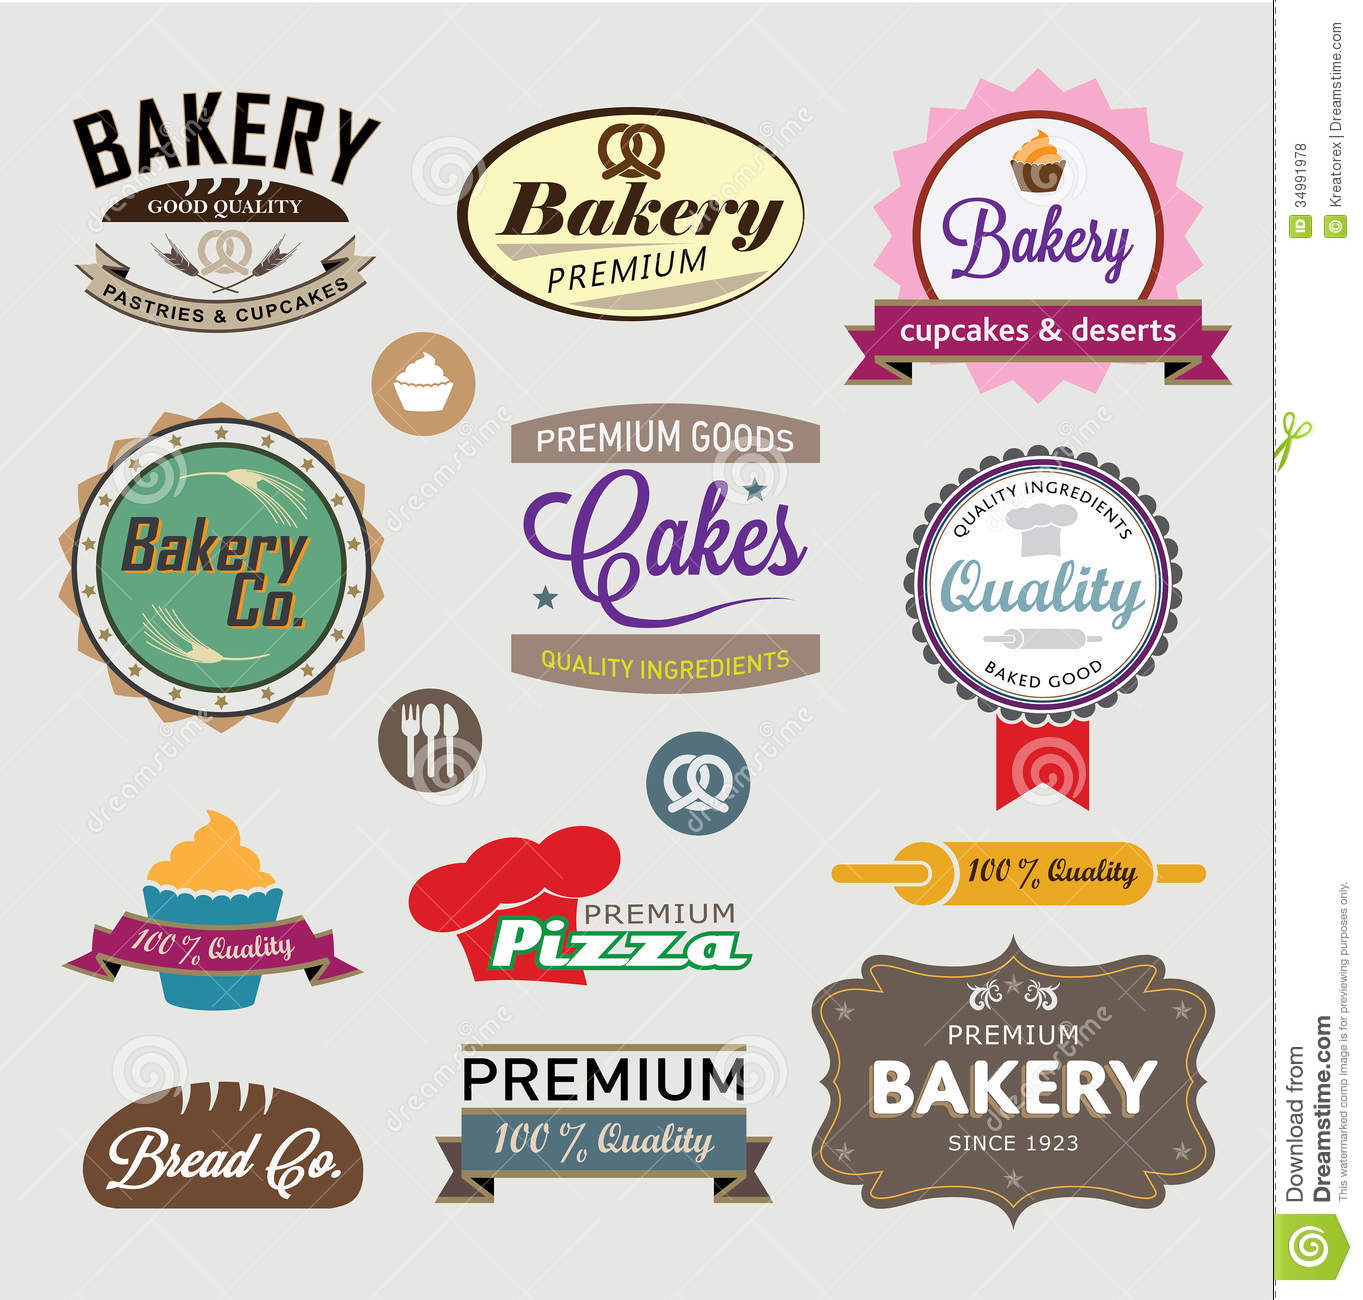 Bakery Signs Royalty Free Stock Photos   Image  34991978